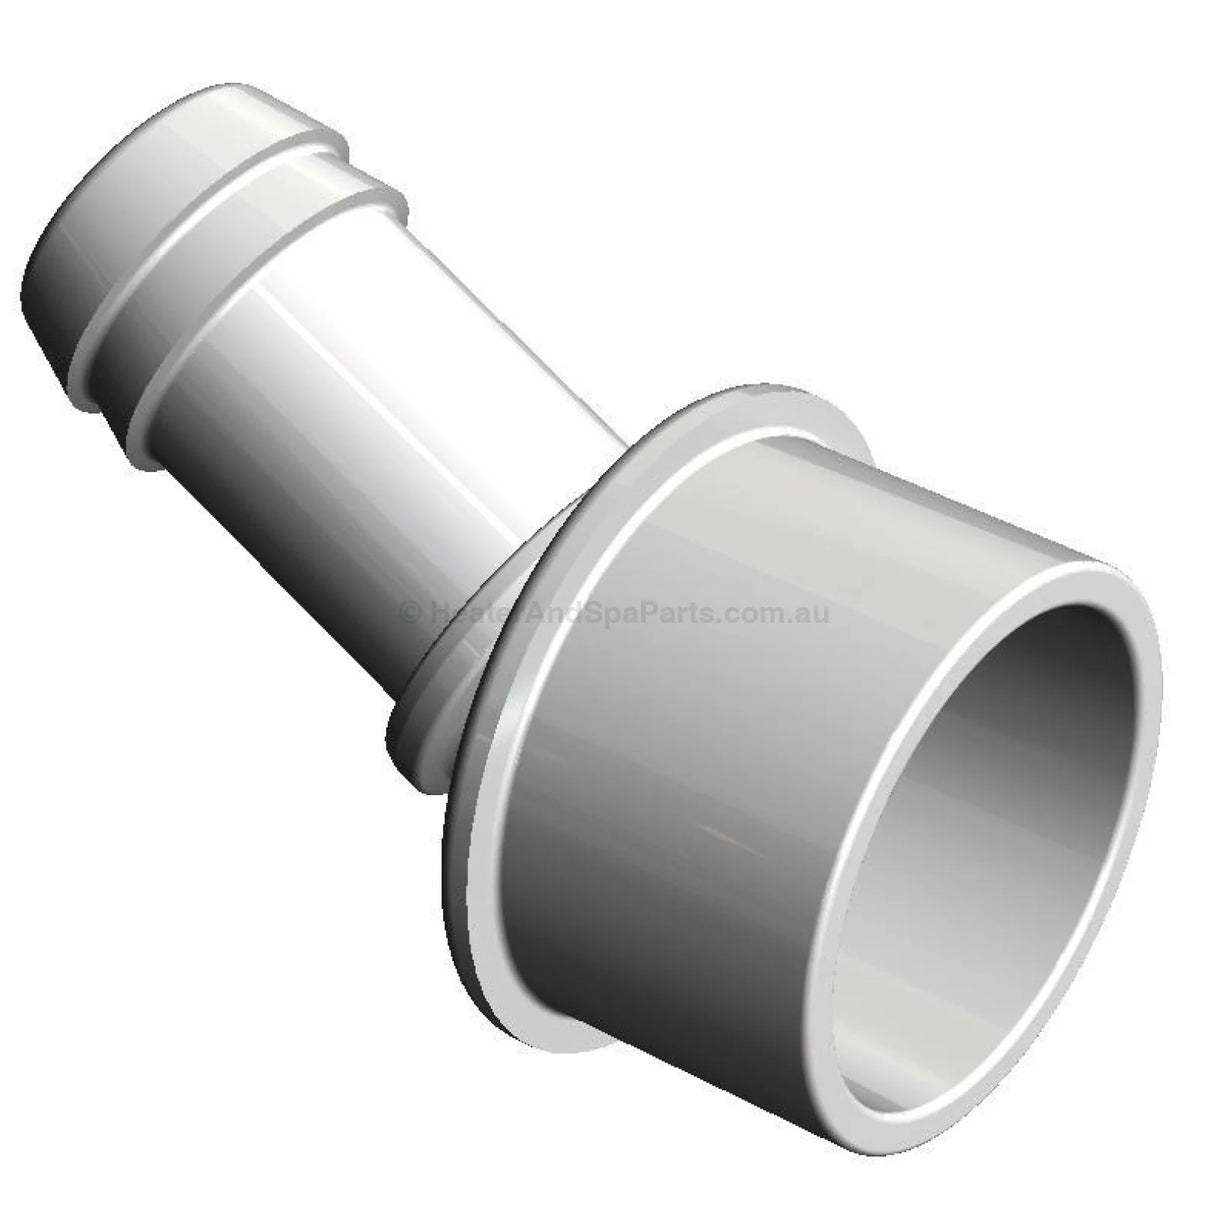 19mm Barb to 25mm Spigot - Barb Adaptor - 45° Angle - Heater and Spa Parts